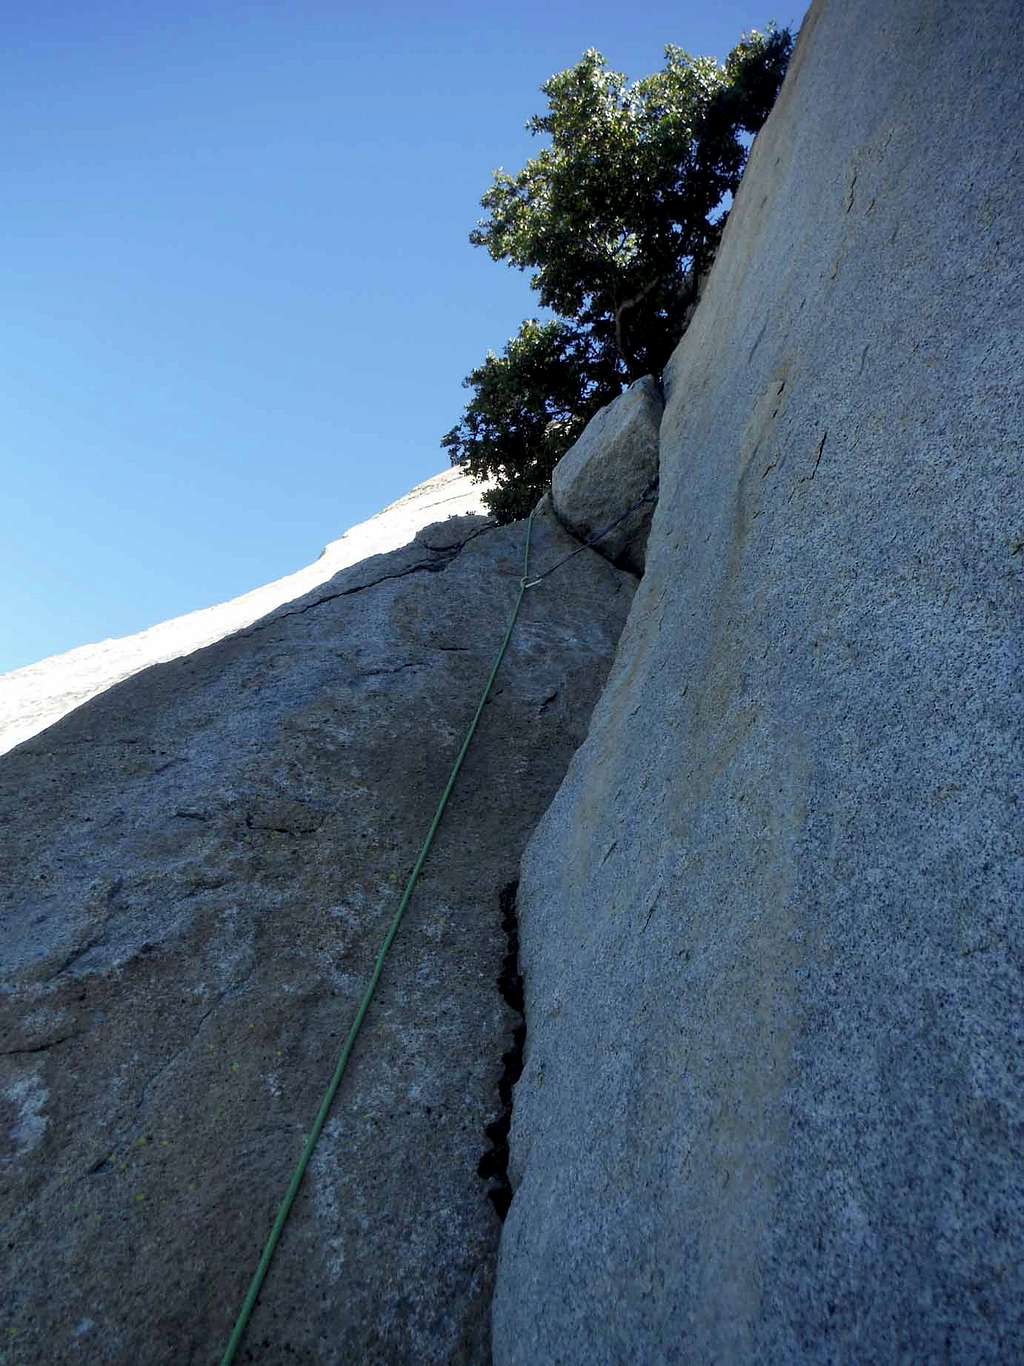 Crux of the route, 3rd Pitch